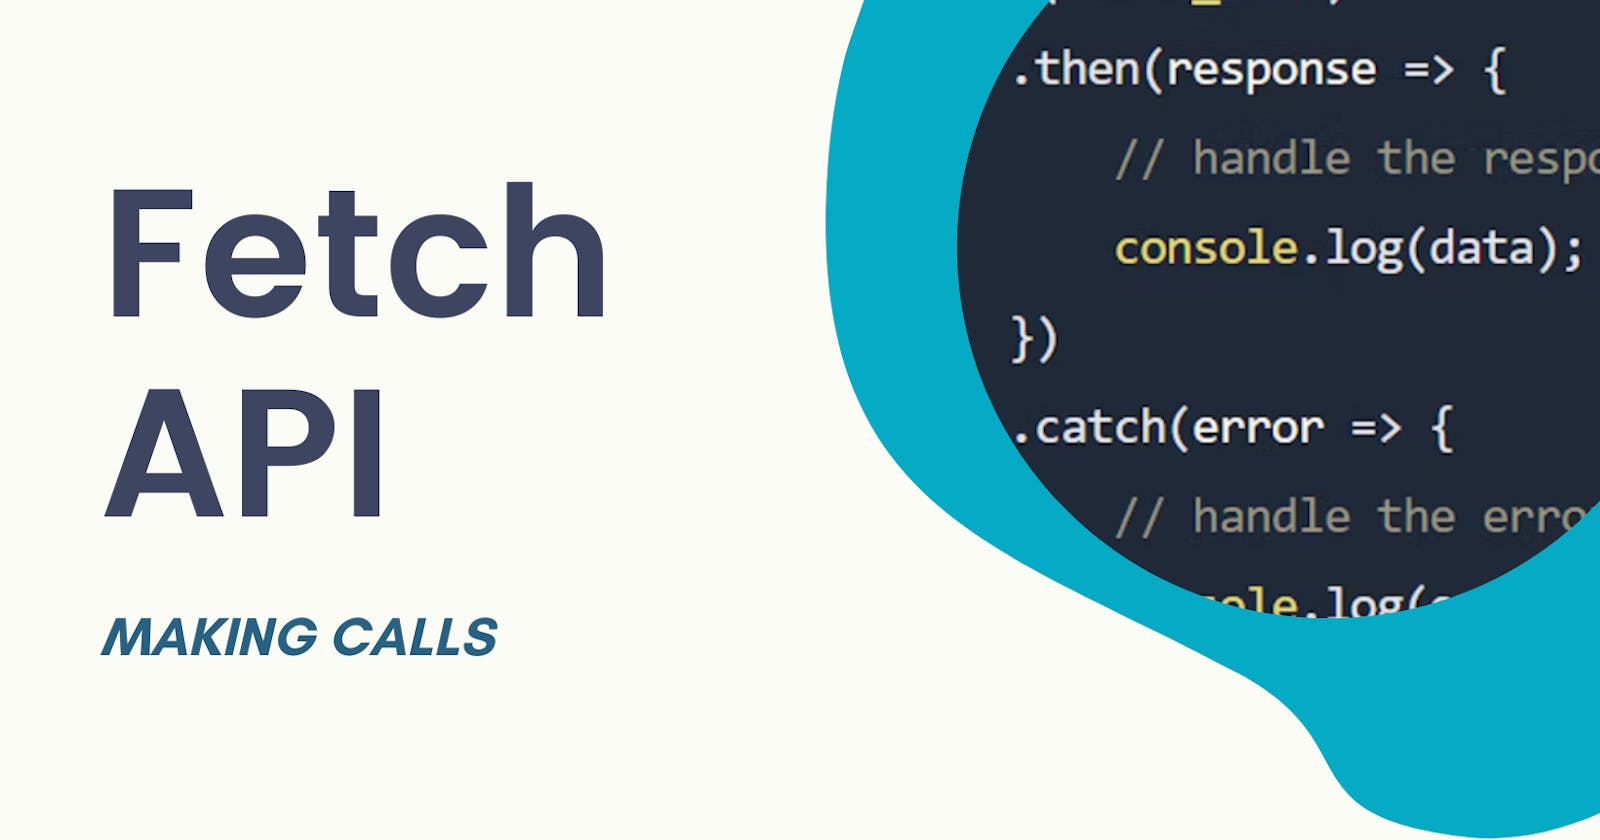 How to call an API with fetch()